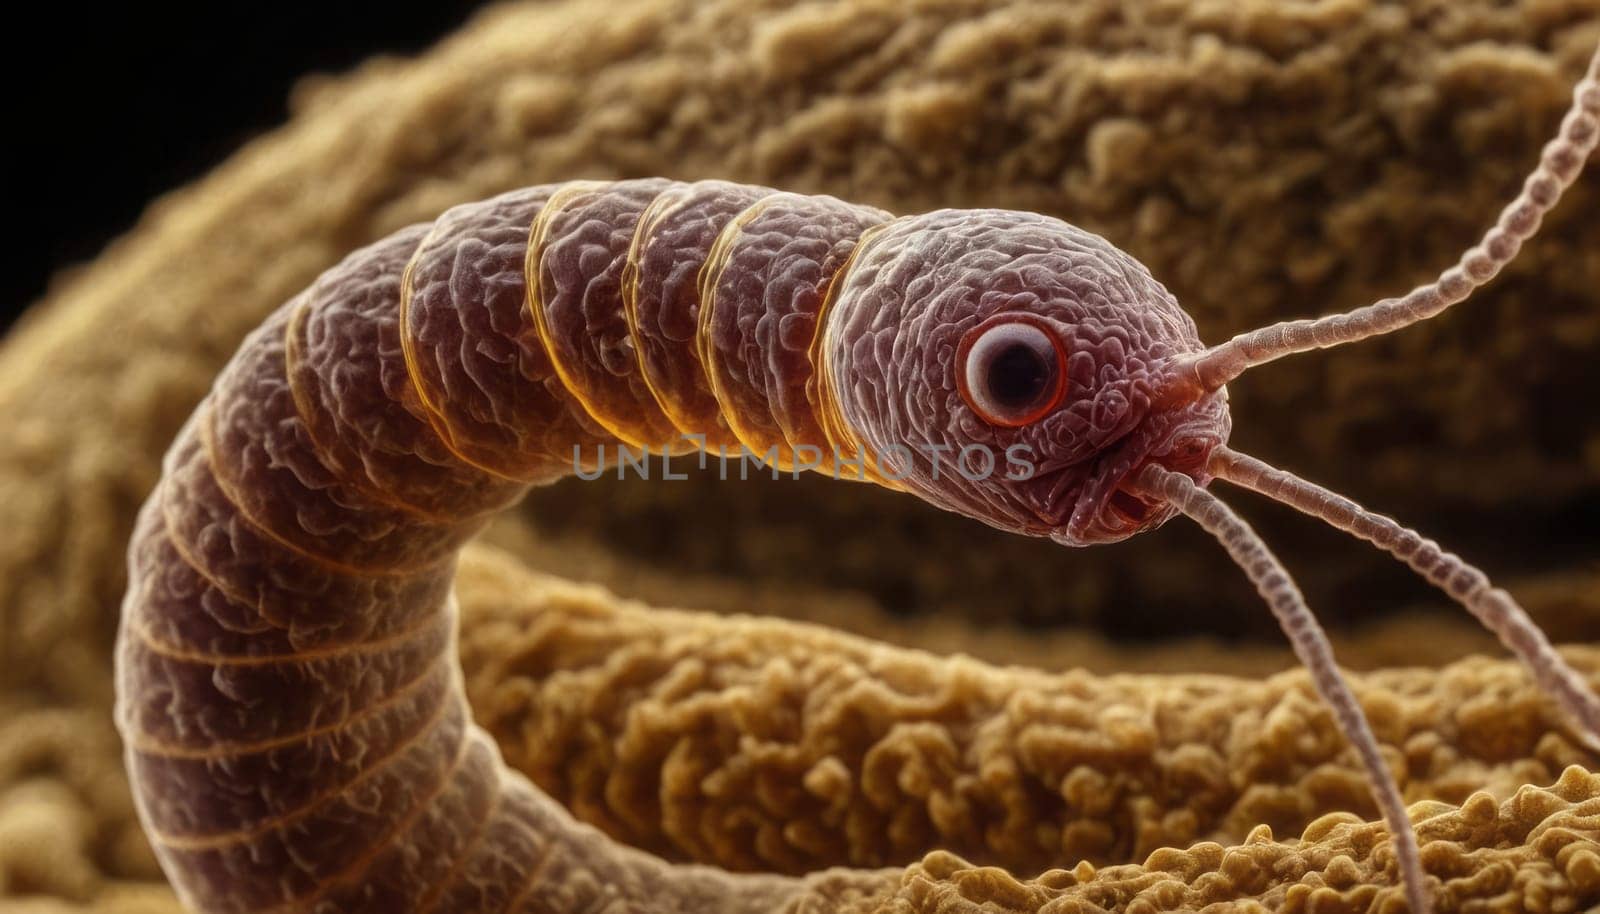 A detailed view of a nematode, showcasing its segmented body and prominent eye against an abstract textured background